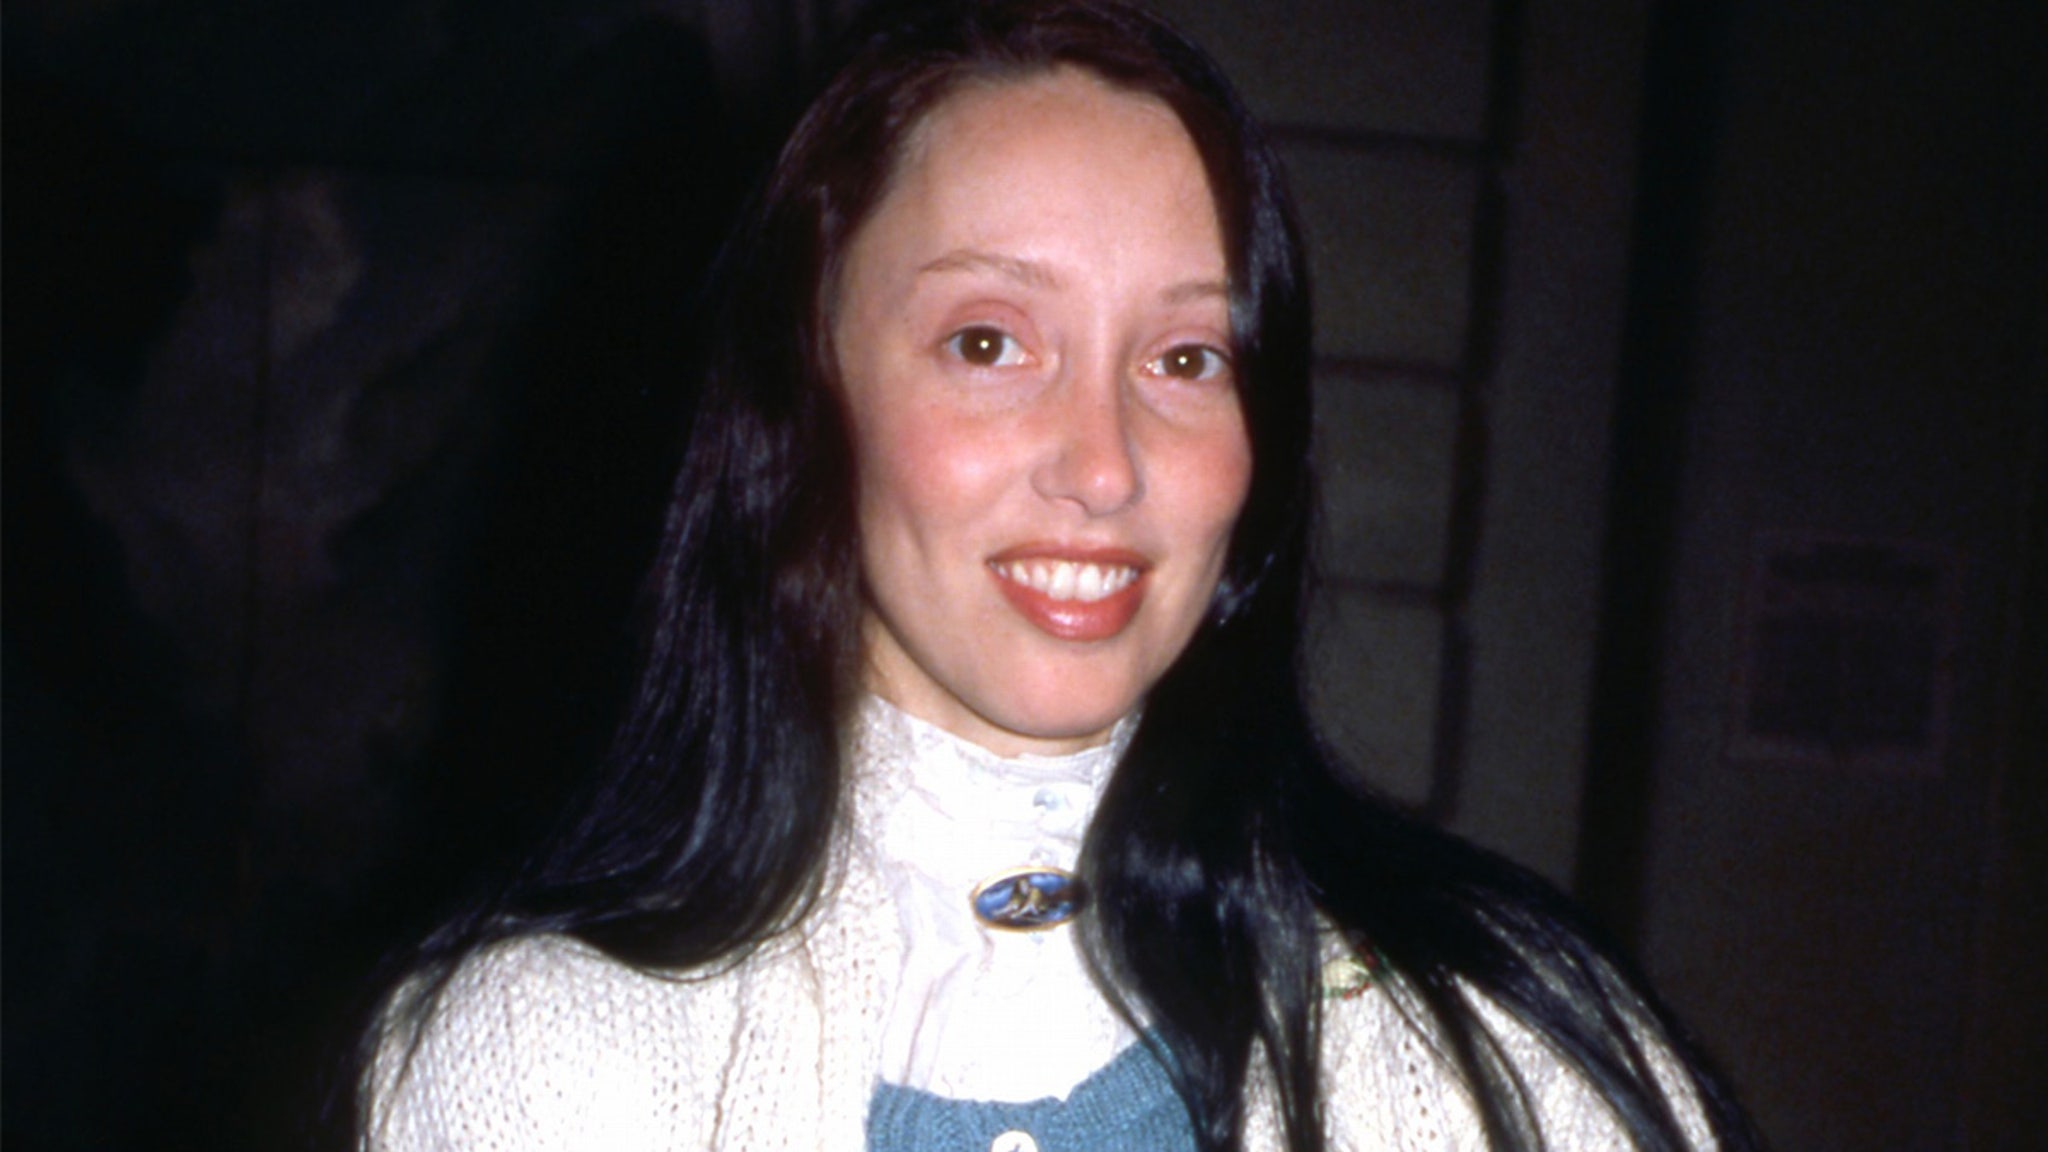 Shelley Duvall, famous for her role in “The Shining,” has died at the age of 75